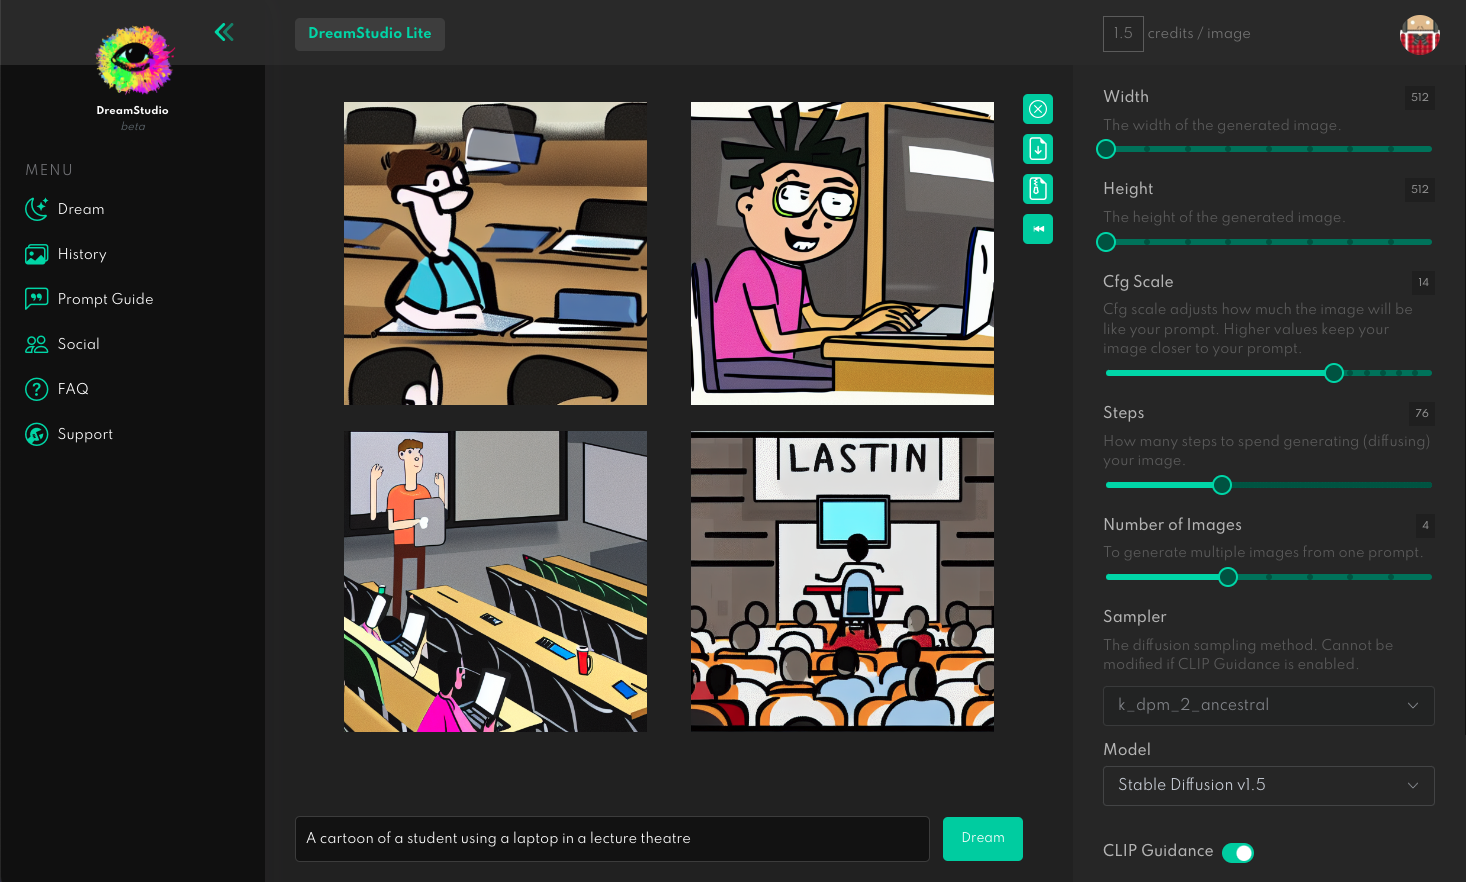 A screen shot showing Dream Studio with two cartoon images of students using laptops in lecture theatres.